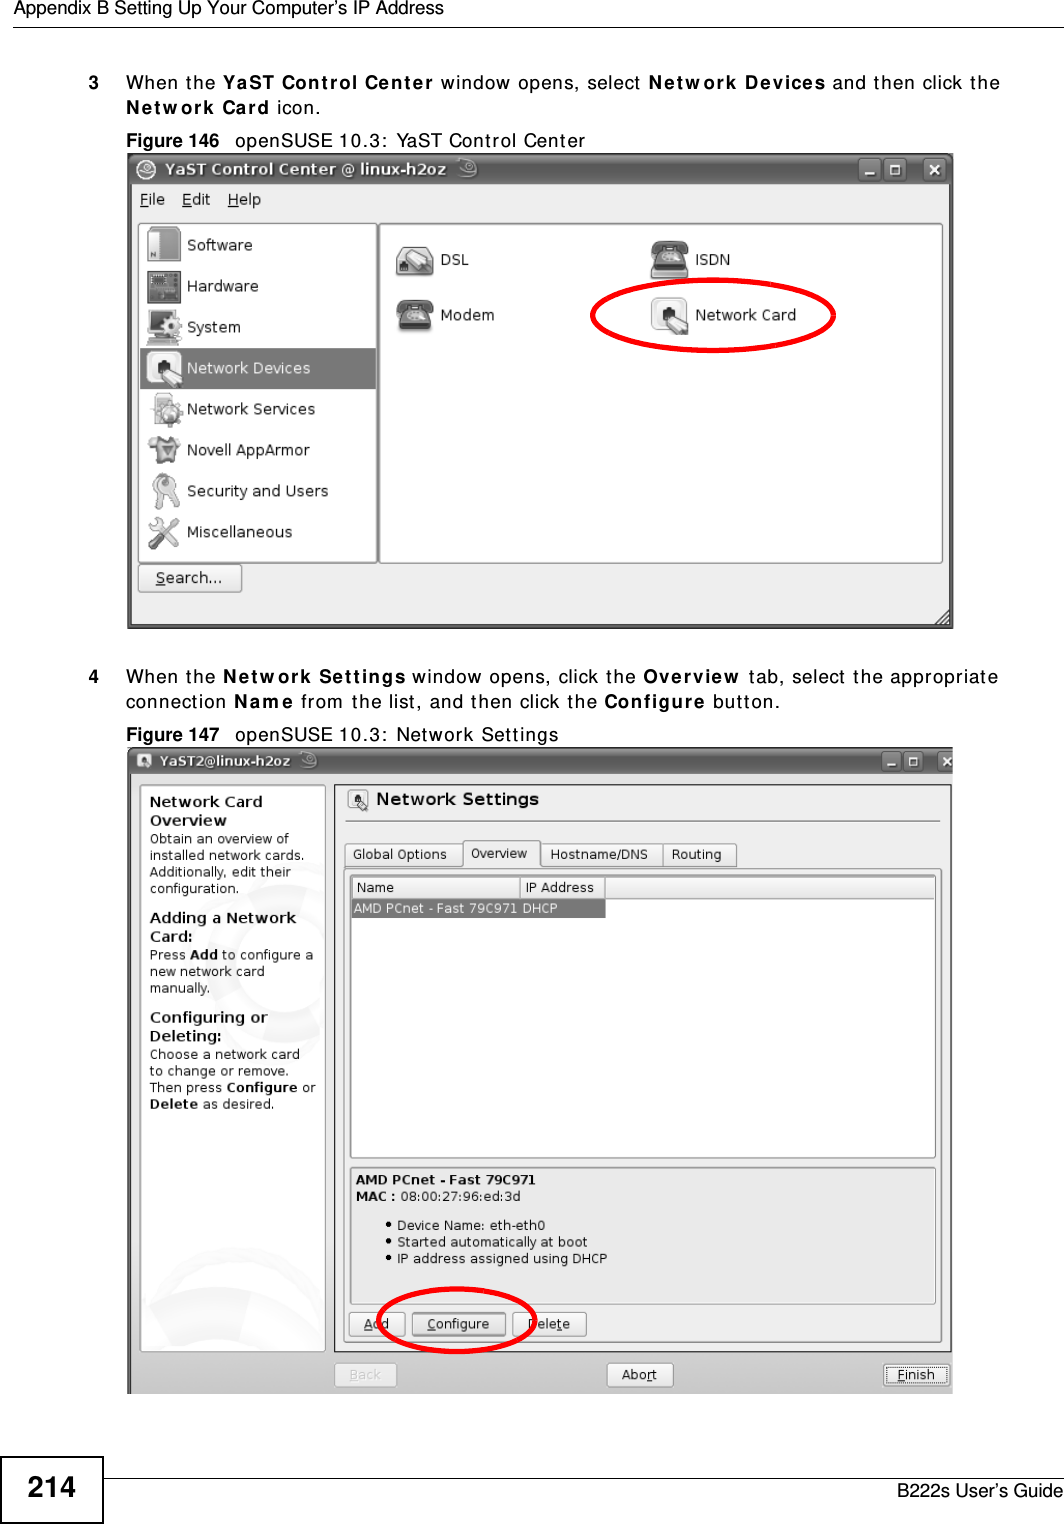 Appendix B Setting Up Your Computer’s IP AddressB222s User’s Guide2143When the YaST Cont rol Ce n t er  window opens, select  N et w or k  De vices and t hen click the N e t w ork  Ca r d icon.Figure 146   openSUSE 10.3:  YaST Control Cent er4When the N e t w or k  Set t ings w indow opens, click t he Overvie w  t ab, select  t he appr opriat e connection N a m e  from  t he list , and t hen click the Configure butt on. Figure 147   openSUSE 10.3:  Net work Sett ings